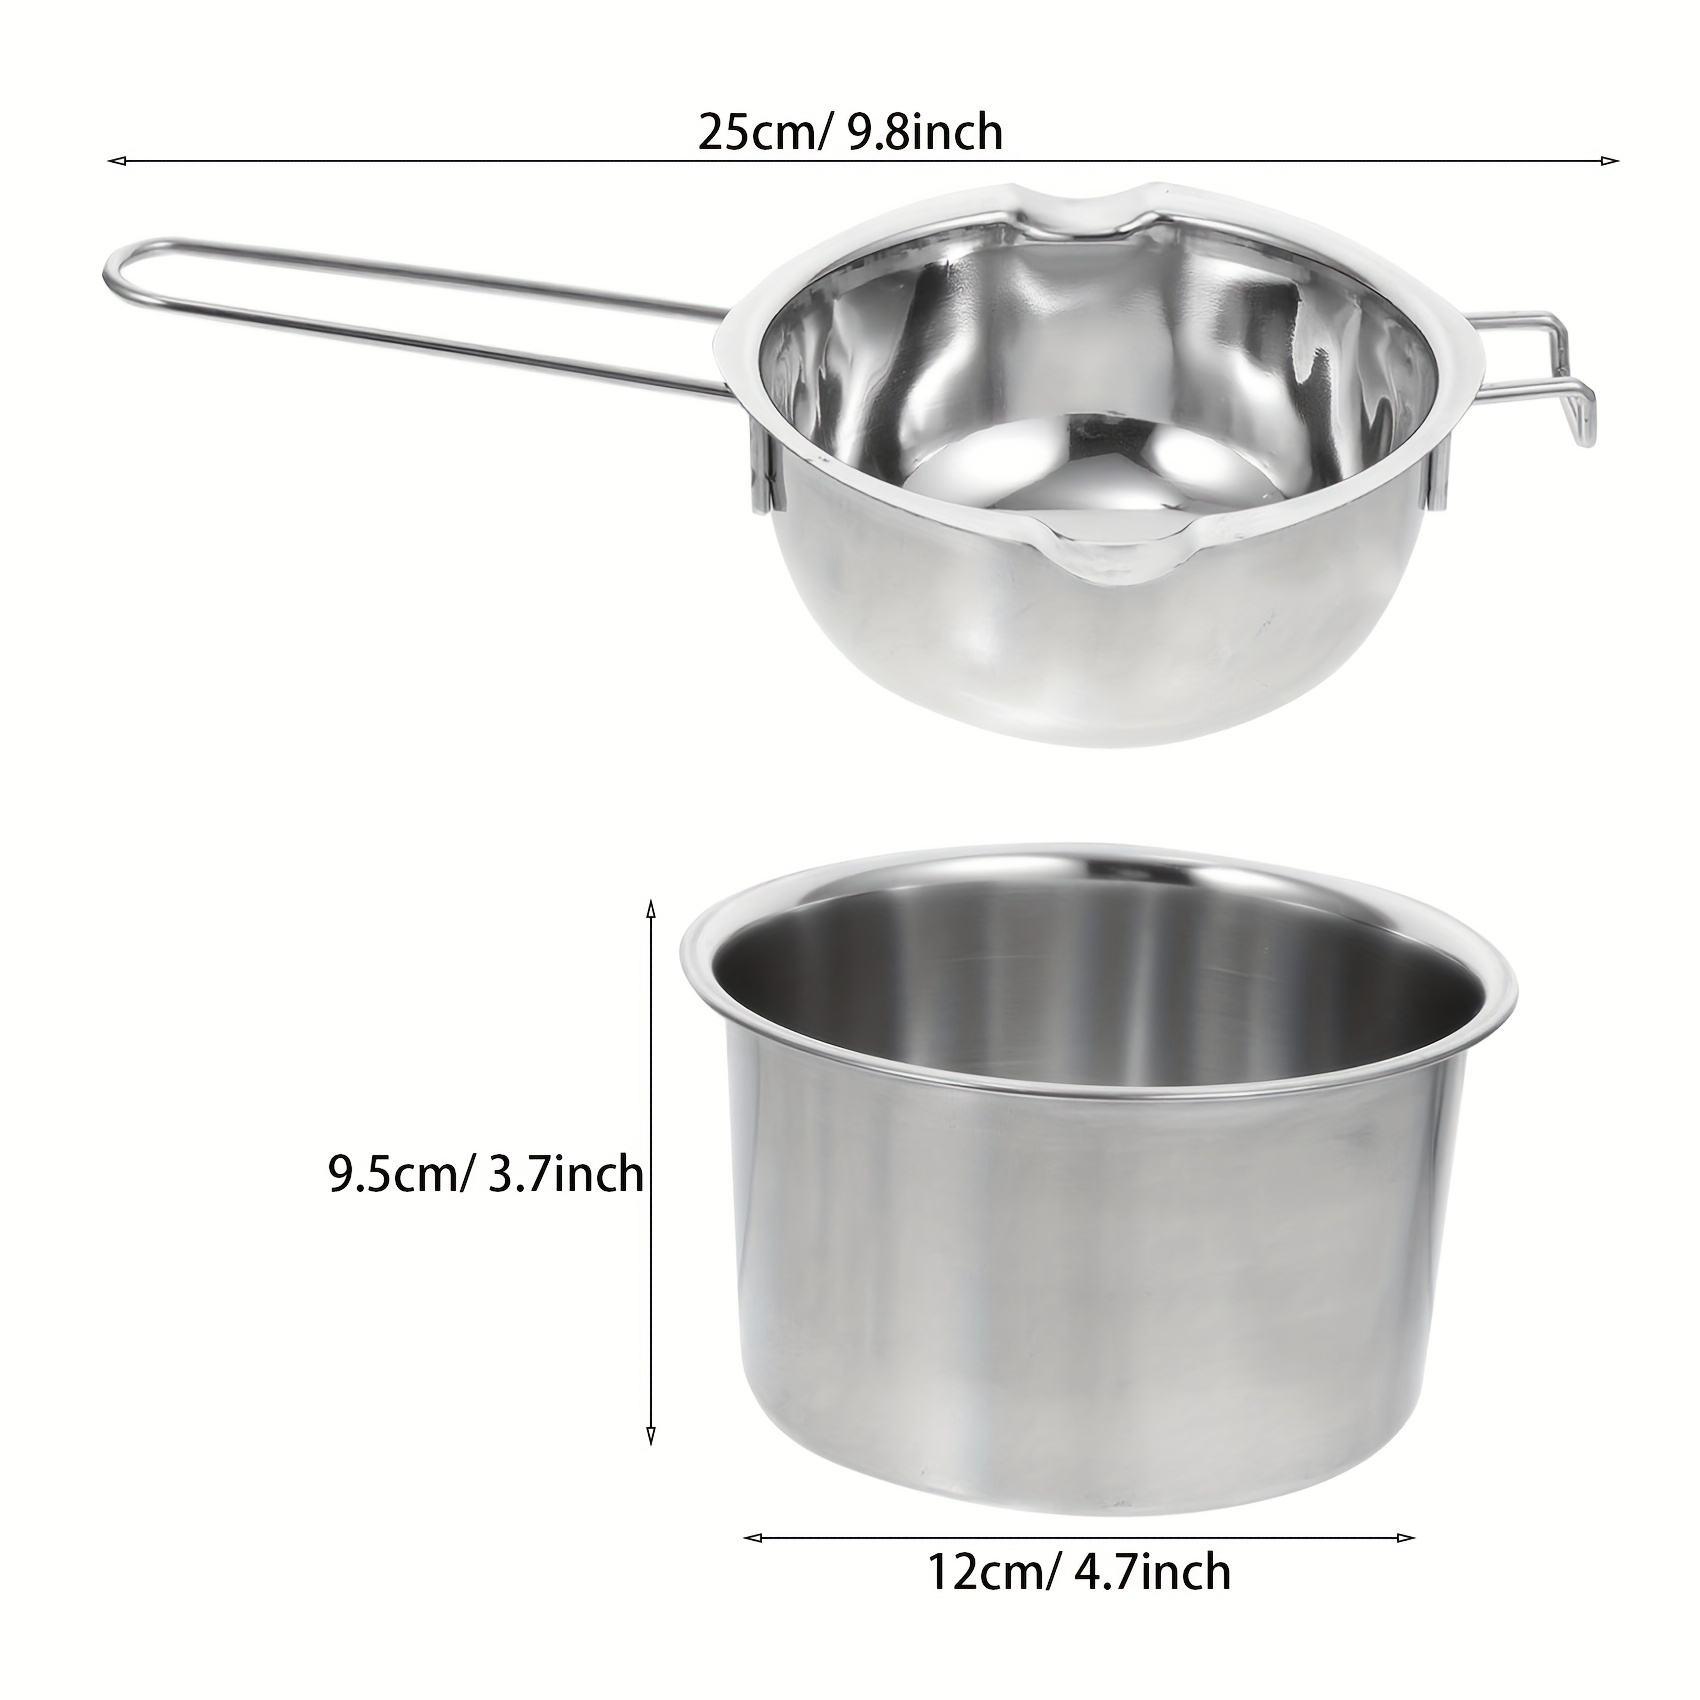 2Pcs Double Boiler Pot Set, Stainless Steel Chocolate Melt Pot for Melting  Candy, Wax, Soap DIY Candle Making (450ml & 900ml) 